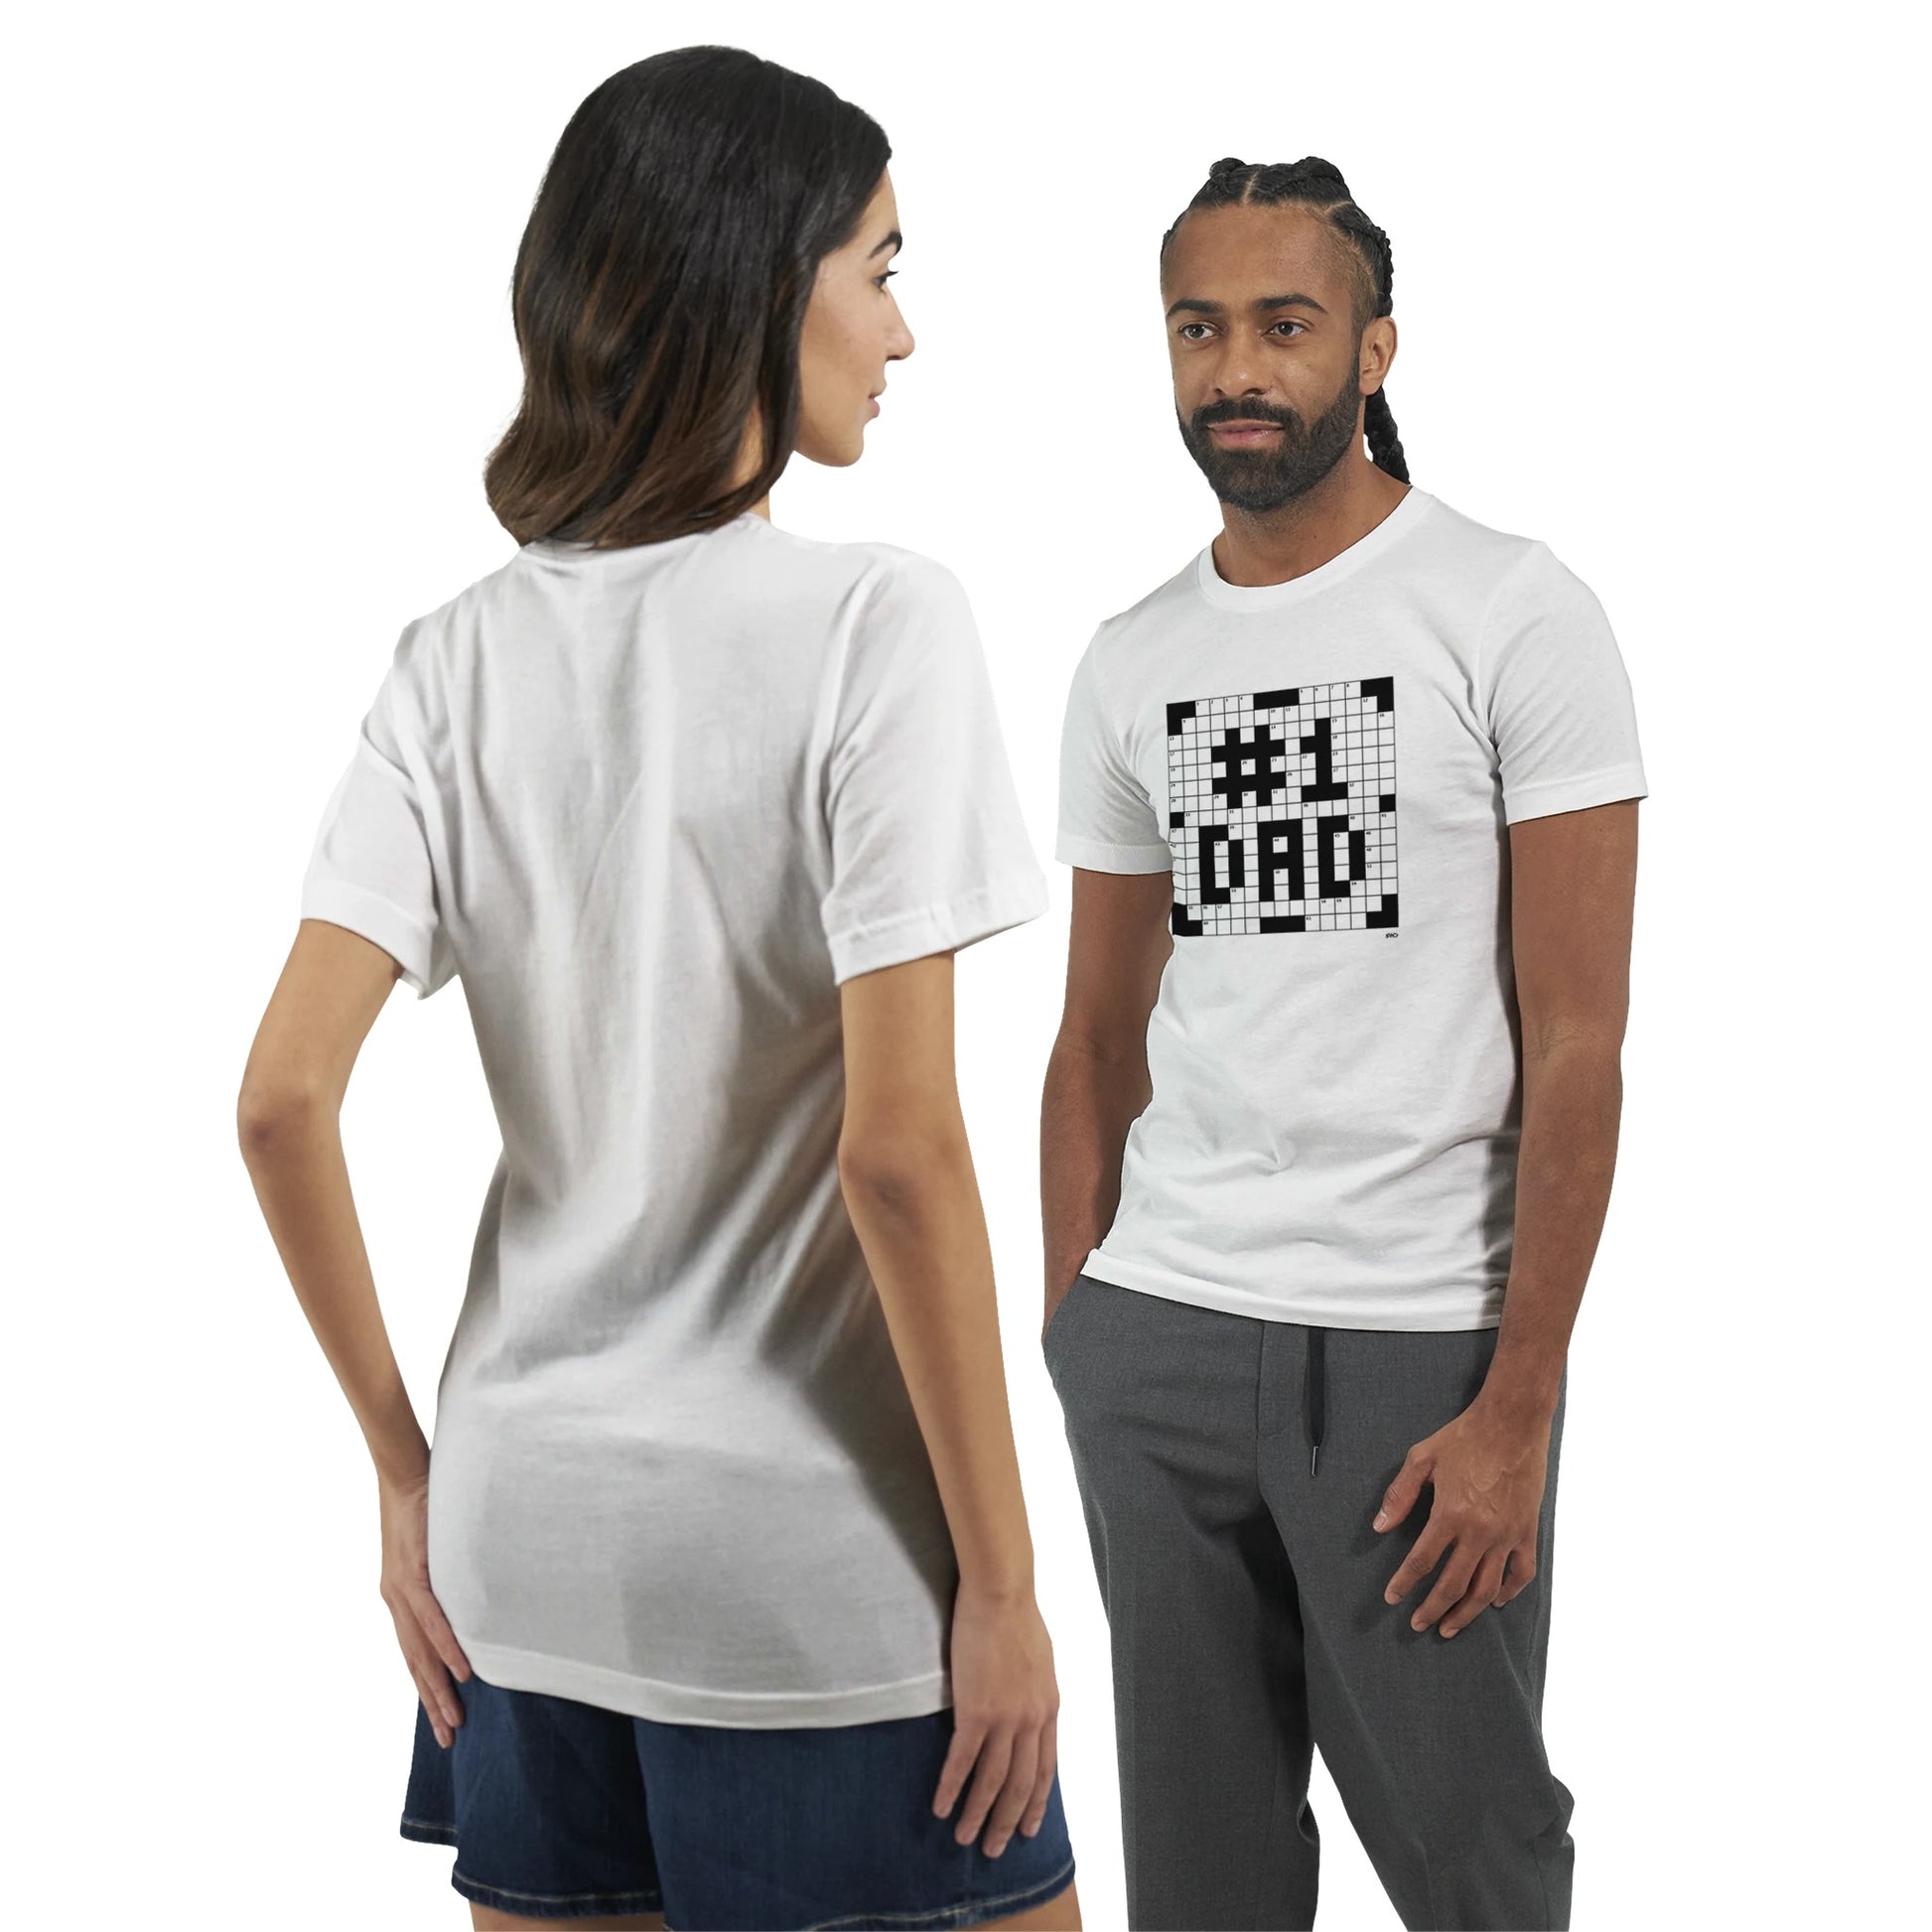 A man and woman model white t-shirts with a crossword themed graphic that reads #1 DAD.